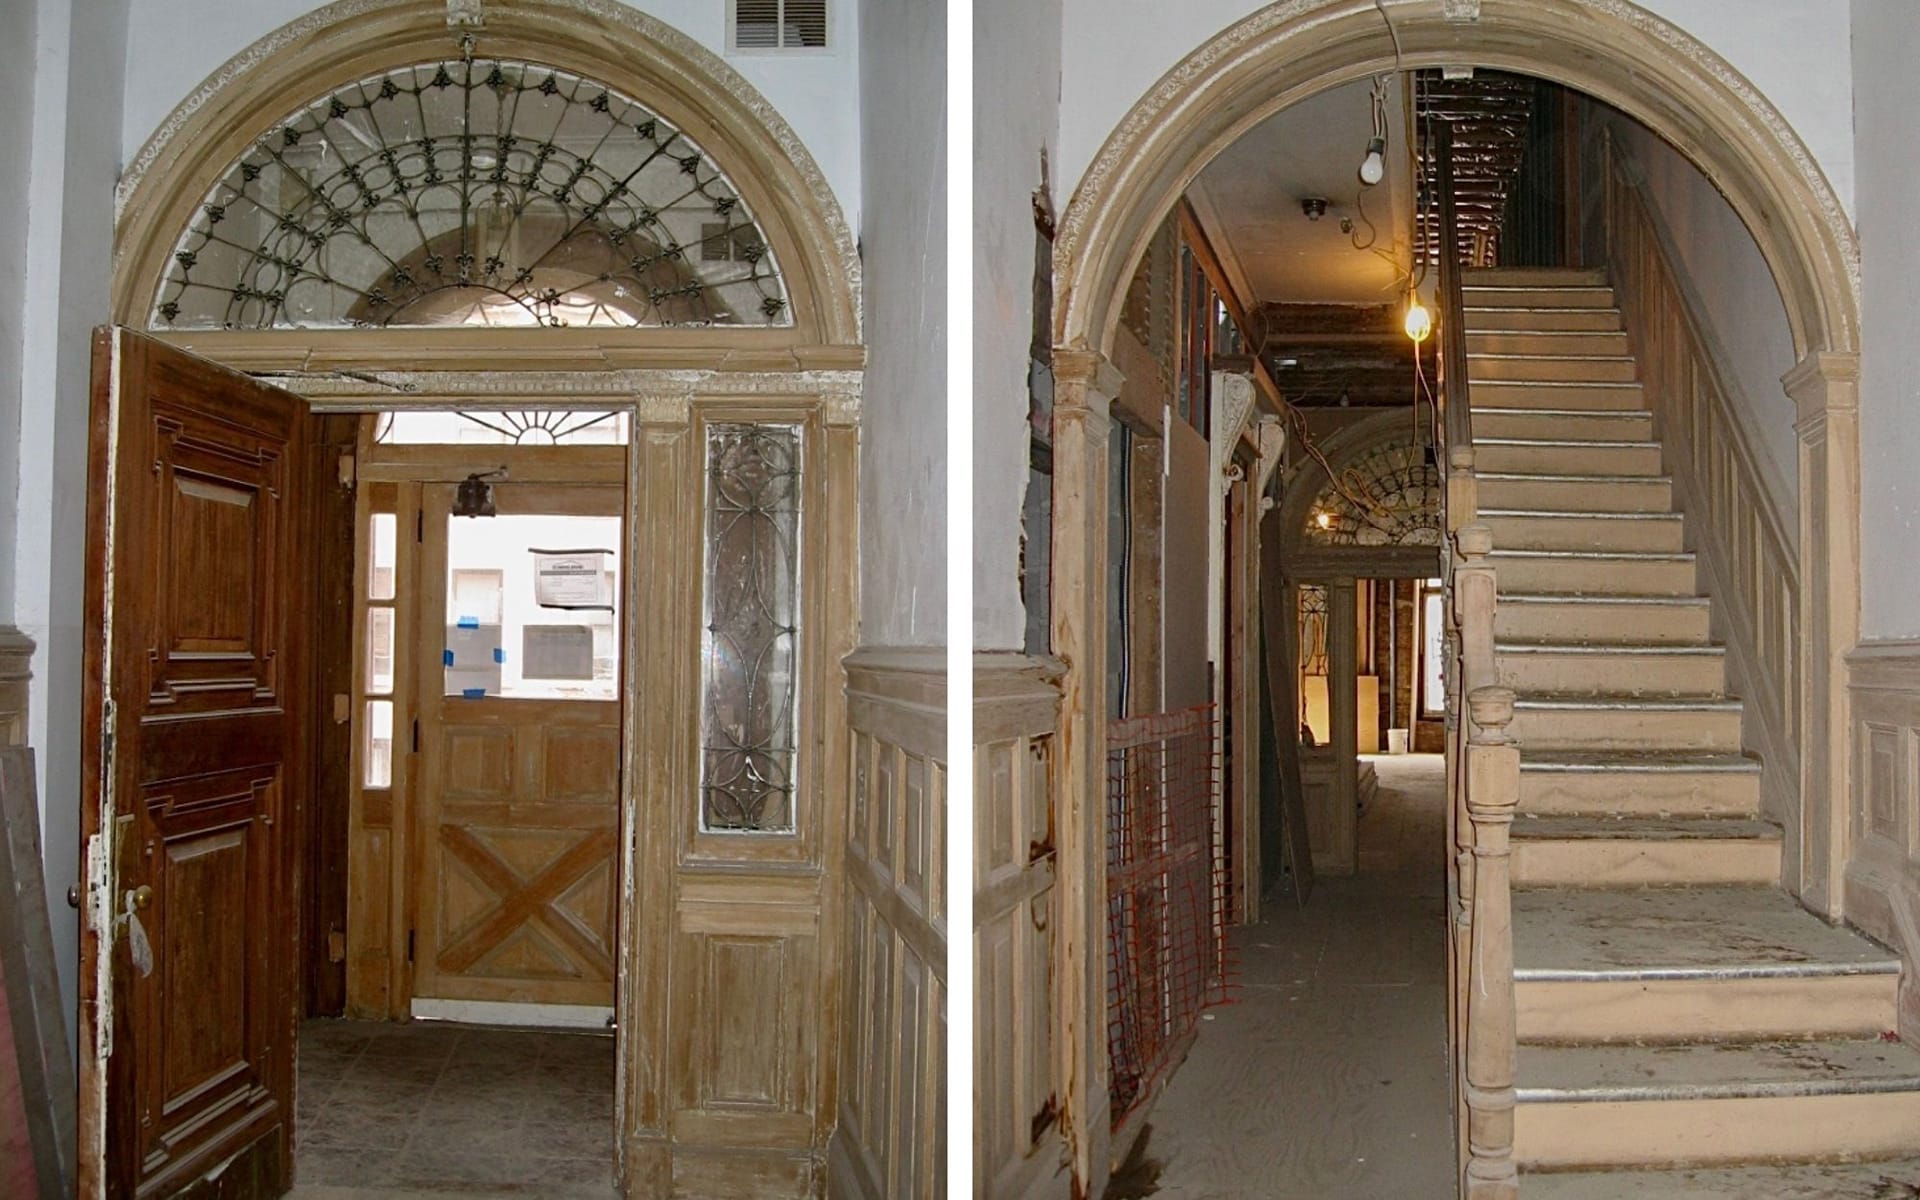 Collage of two images showing historic entry archways of a Brooklyn Heights townhome in disrepair.